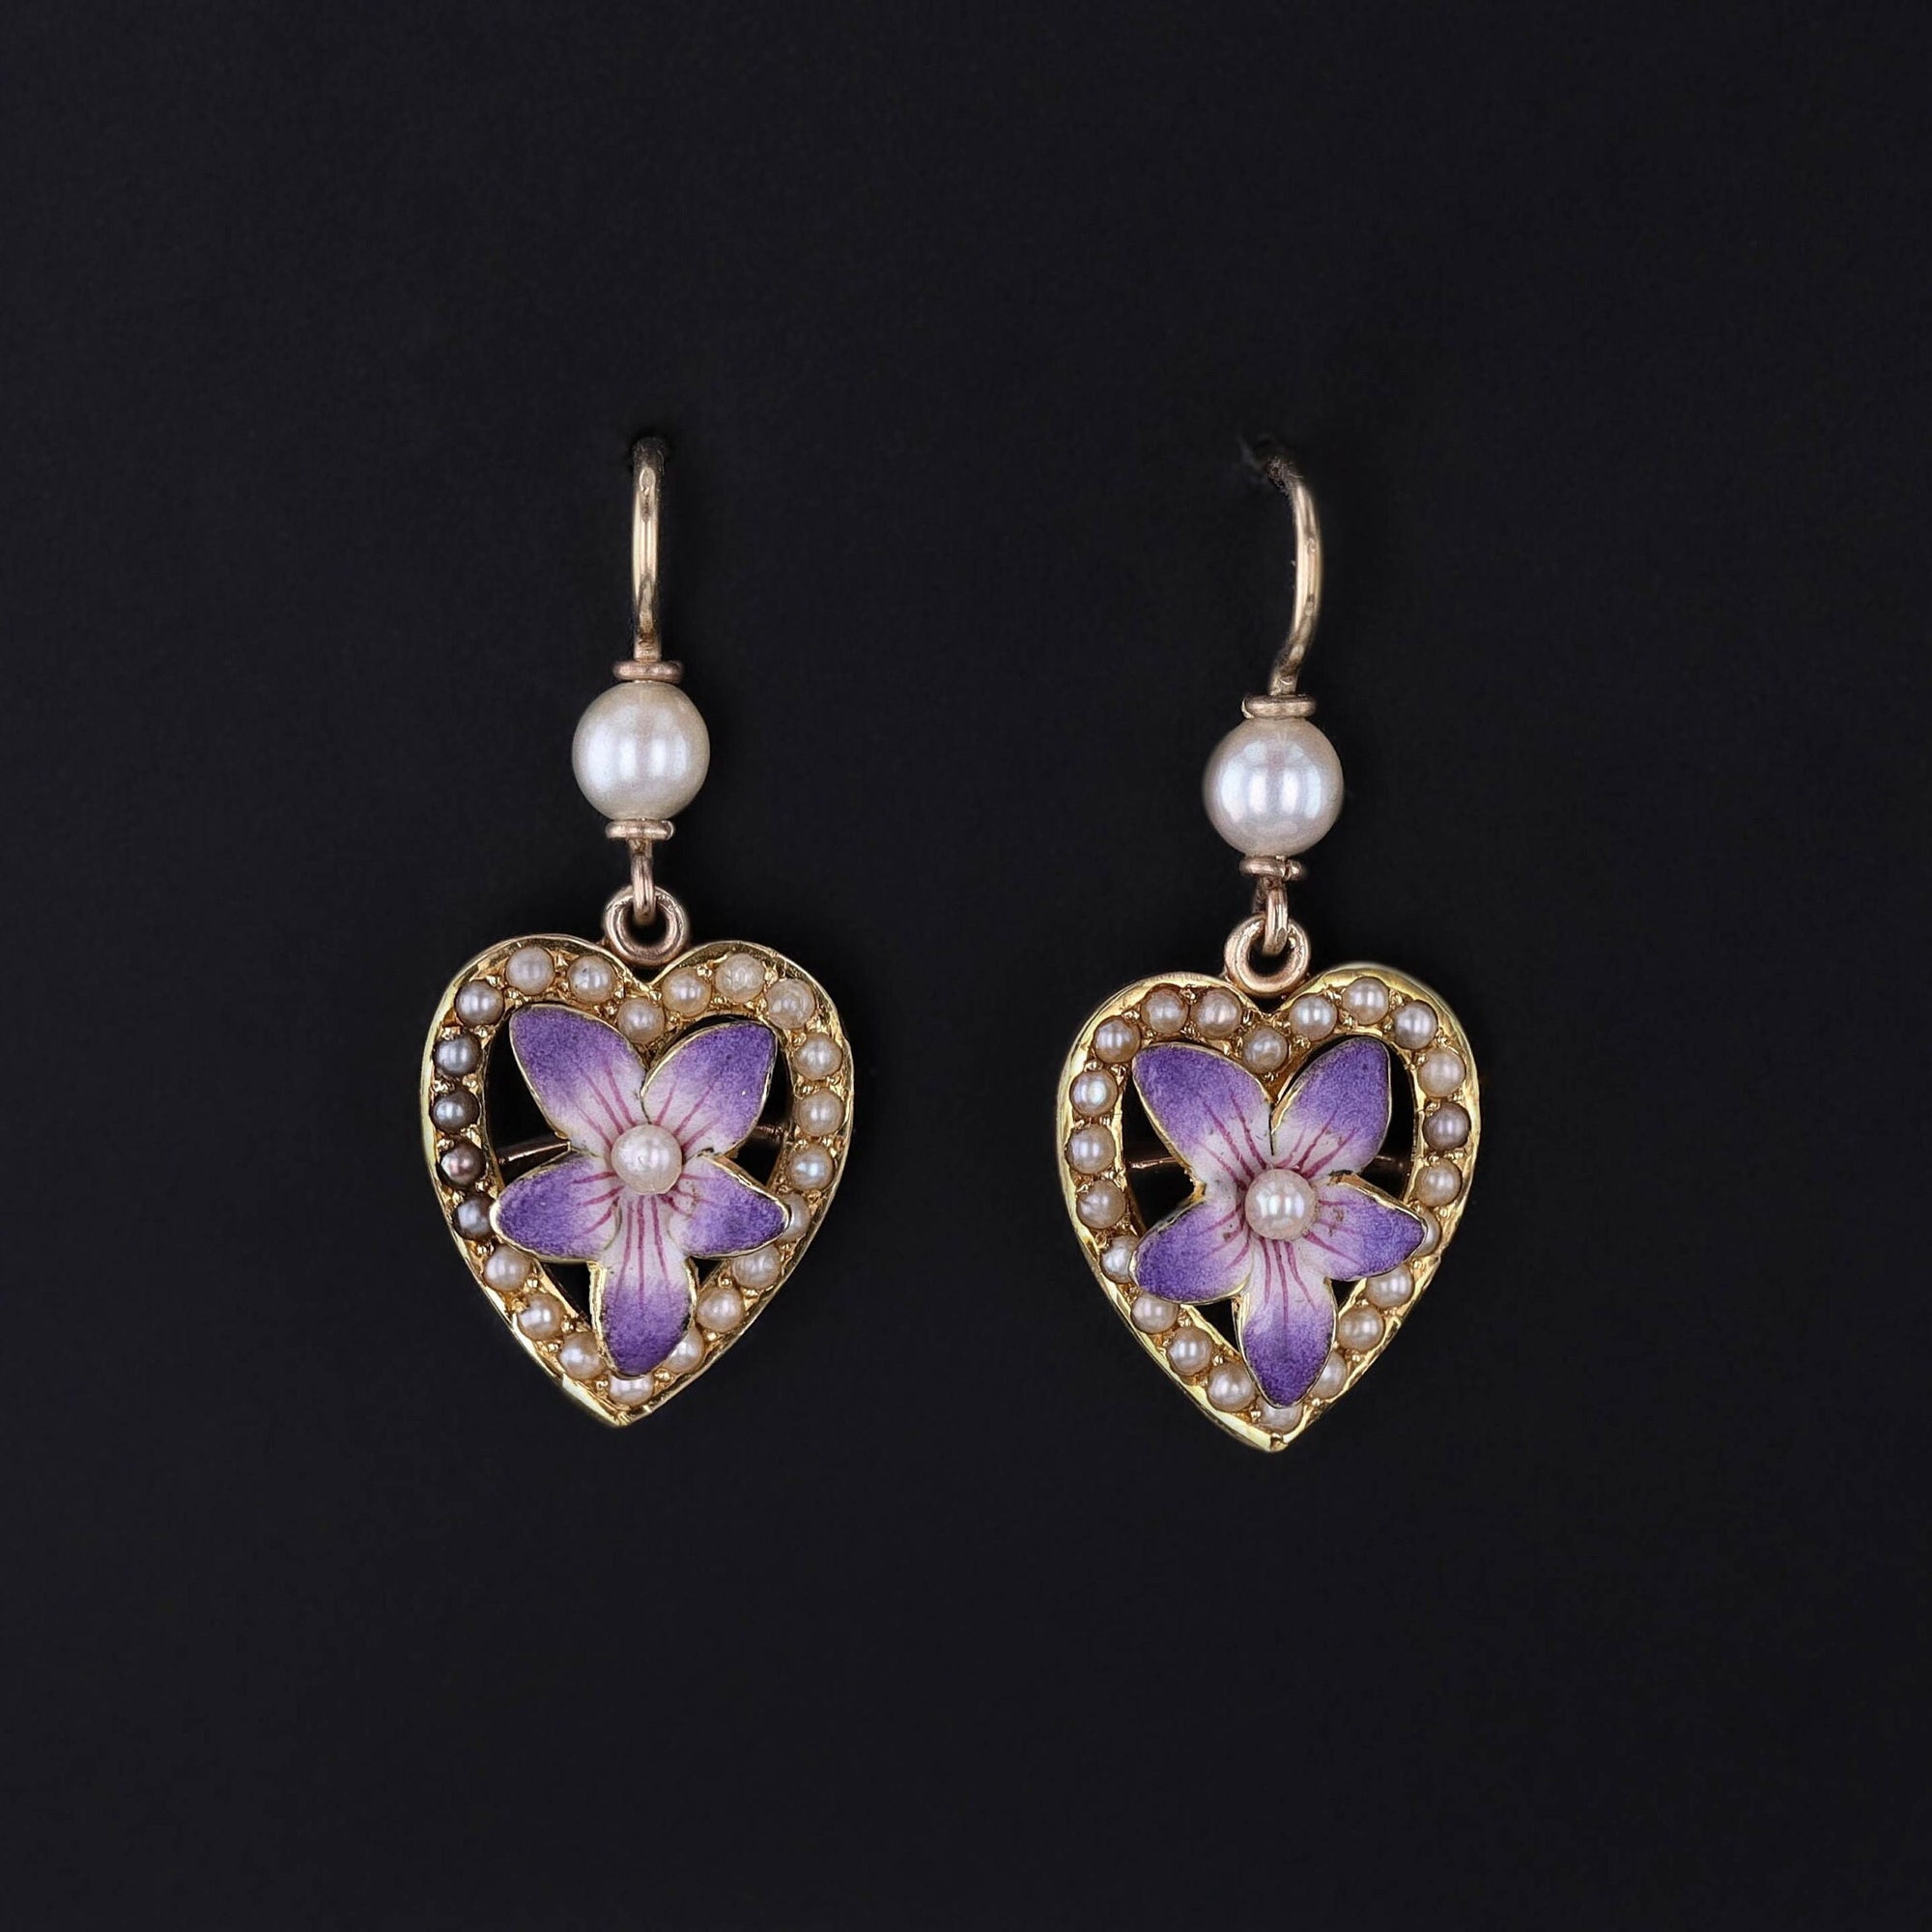 Antique Violet flower earrings created from an antique pin from the early 1900s. The earrings are 14k gold and feature purple enamel violets adorned with pearls set inside of hearts.